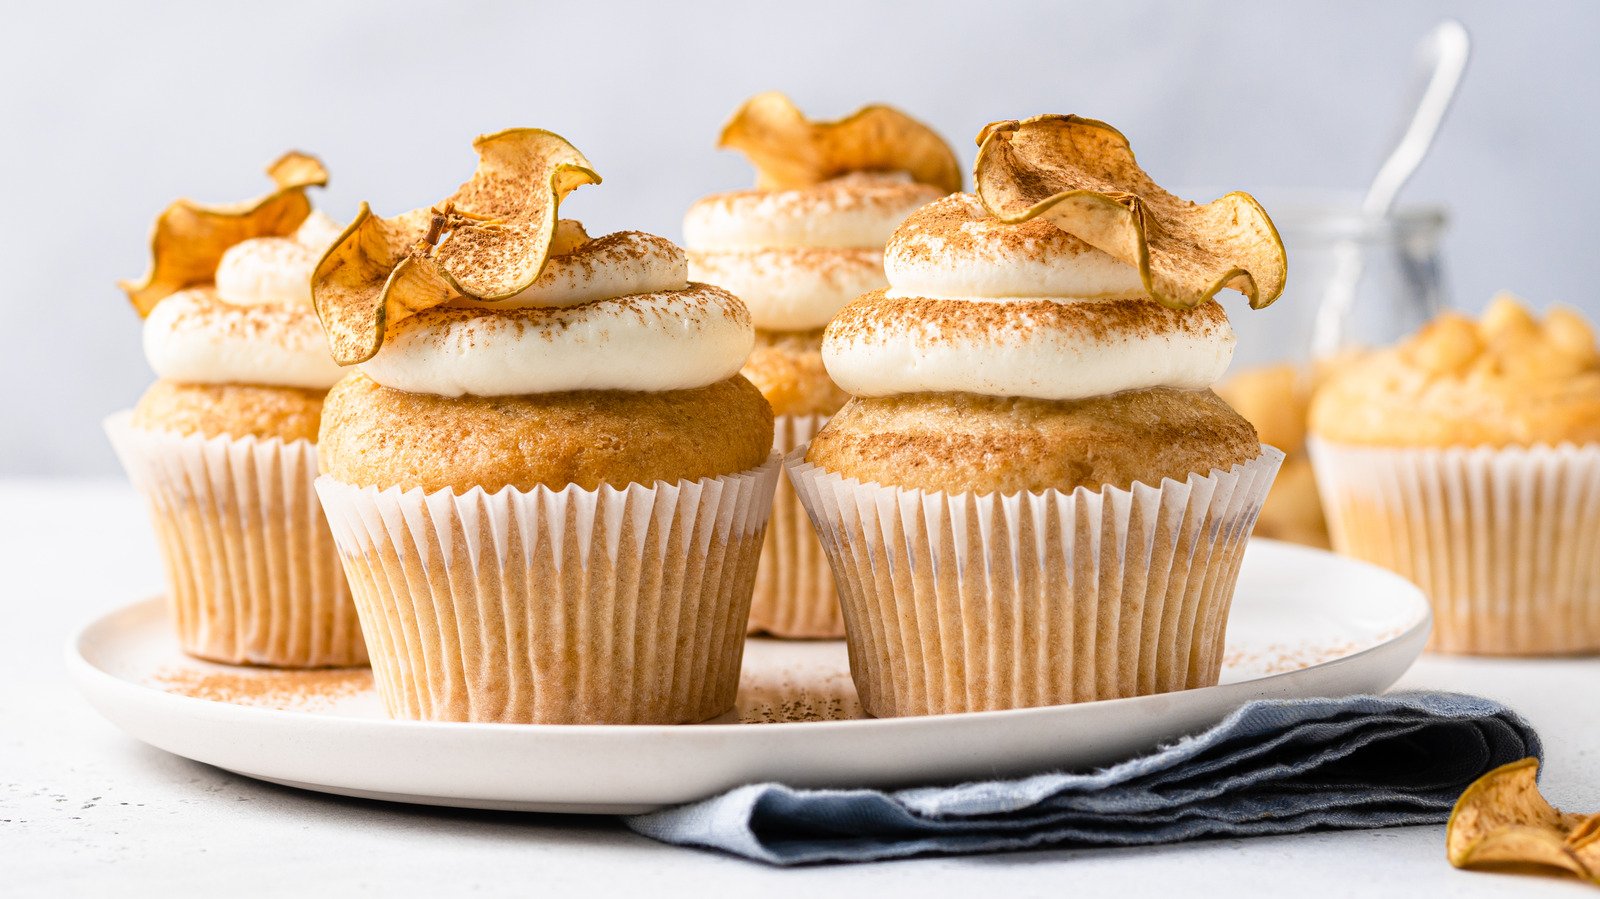 The Unexpected Way Rice Can Make Your Cupcakes Even Better